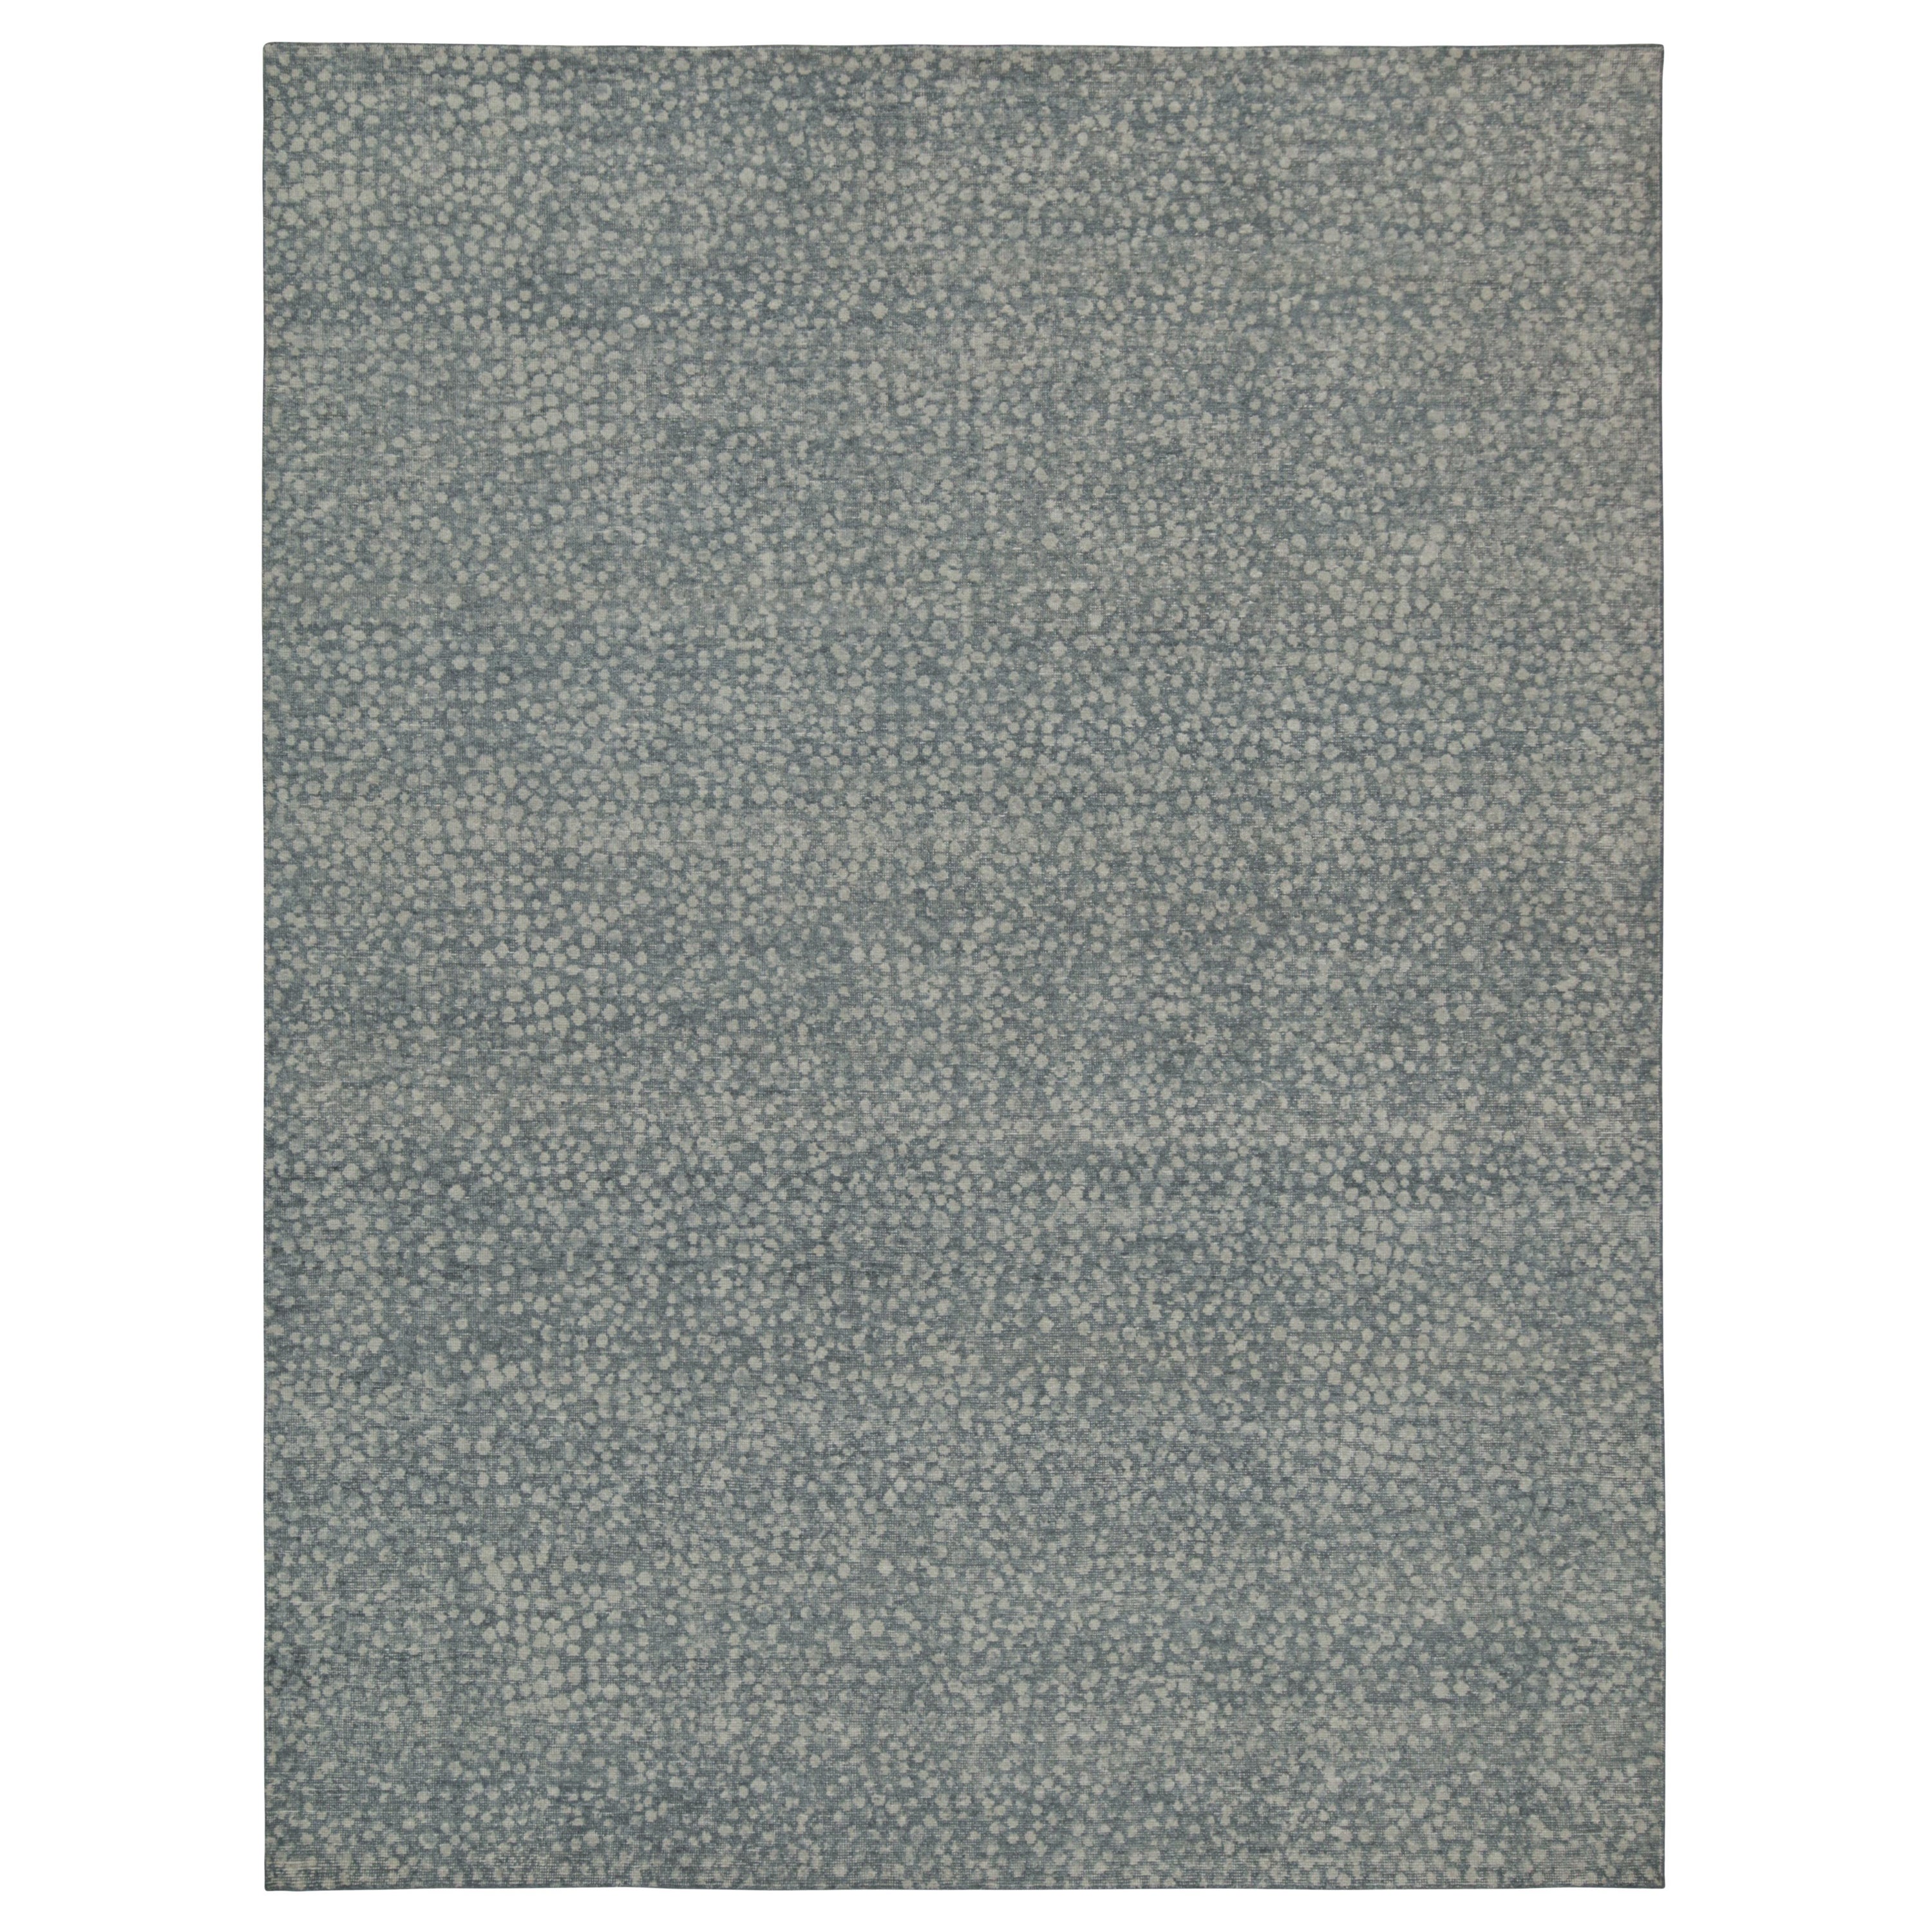 Rug & Kilim’s Distressed Style Abstract Rug in Blue with Gray Dots Pattern